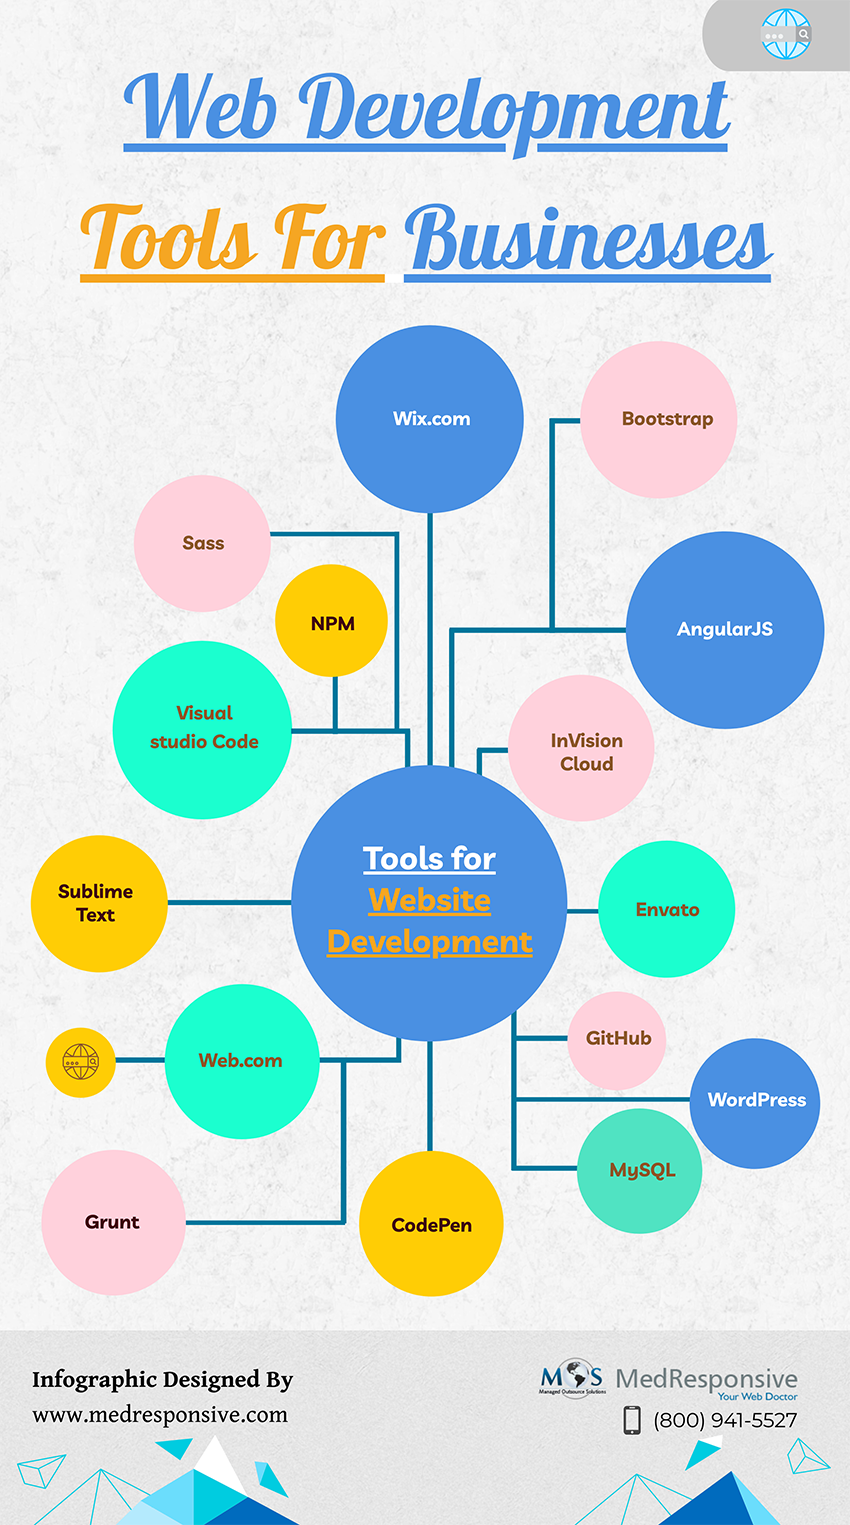 Web Development Tools For Businesses